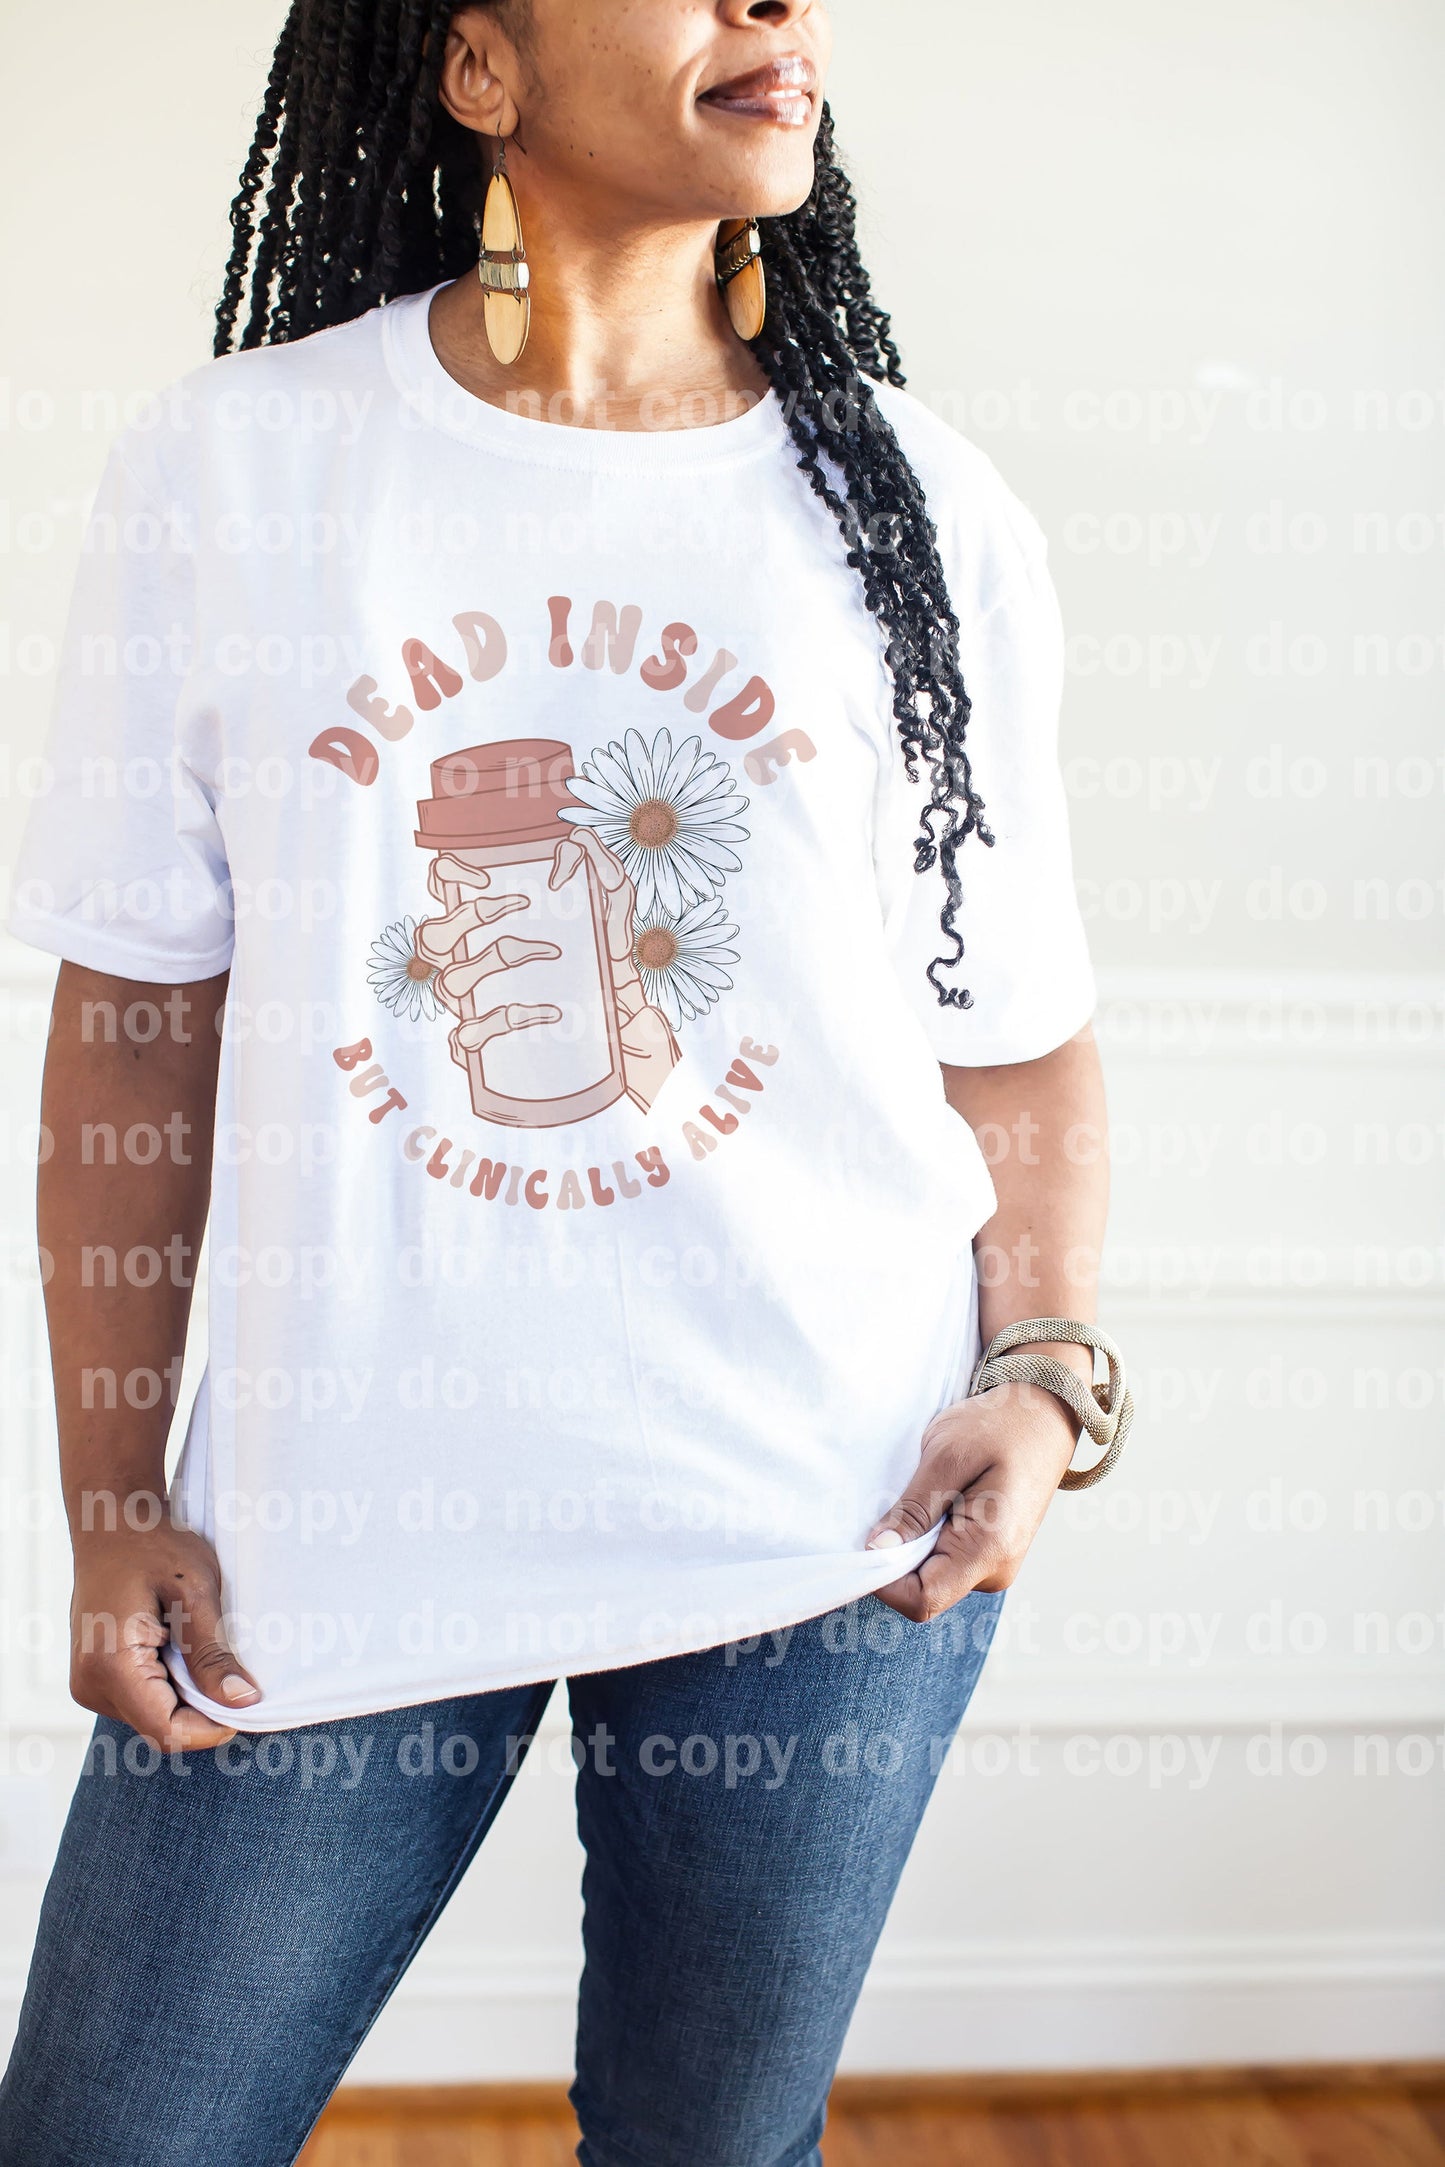 Dead Inside But Clinically Alive Full Color/One Color Dream Print or Sublimation Print